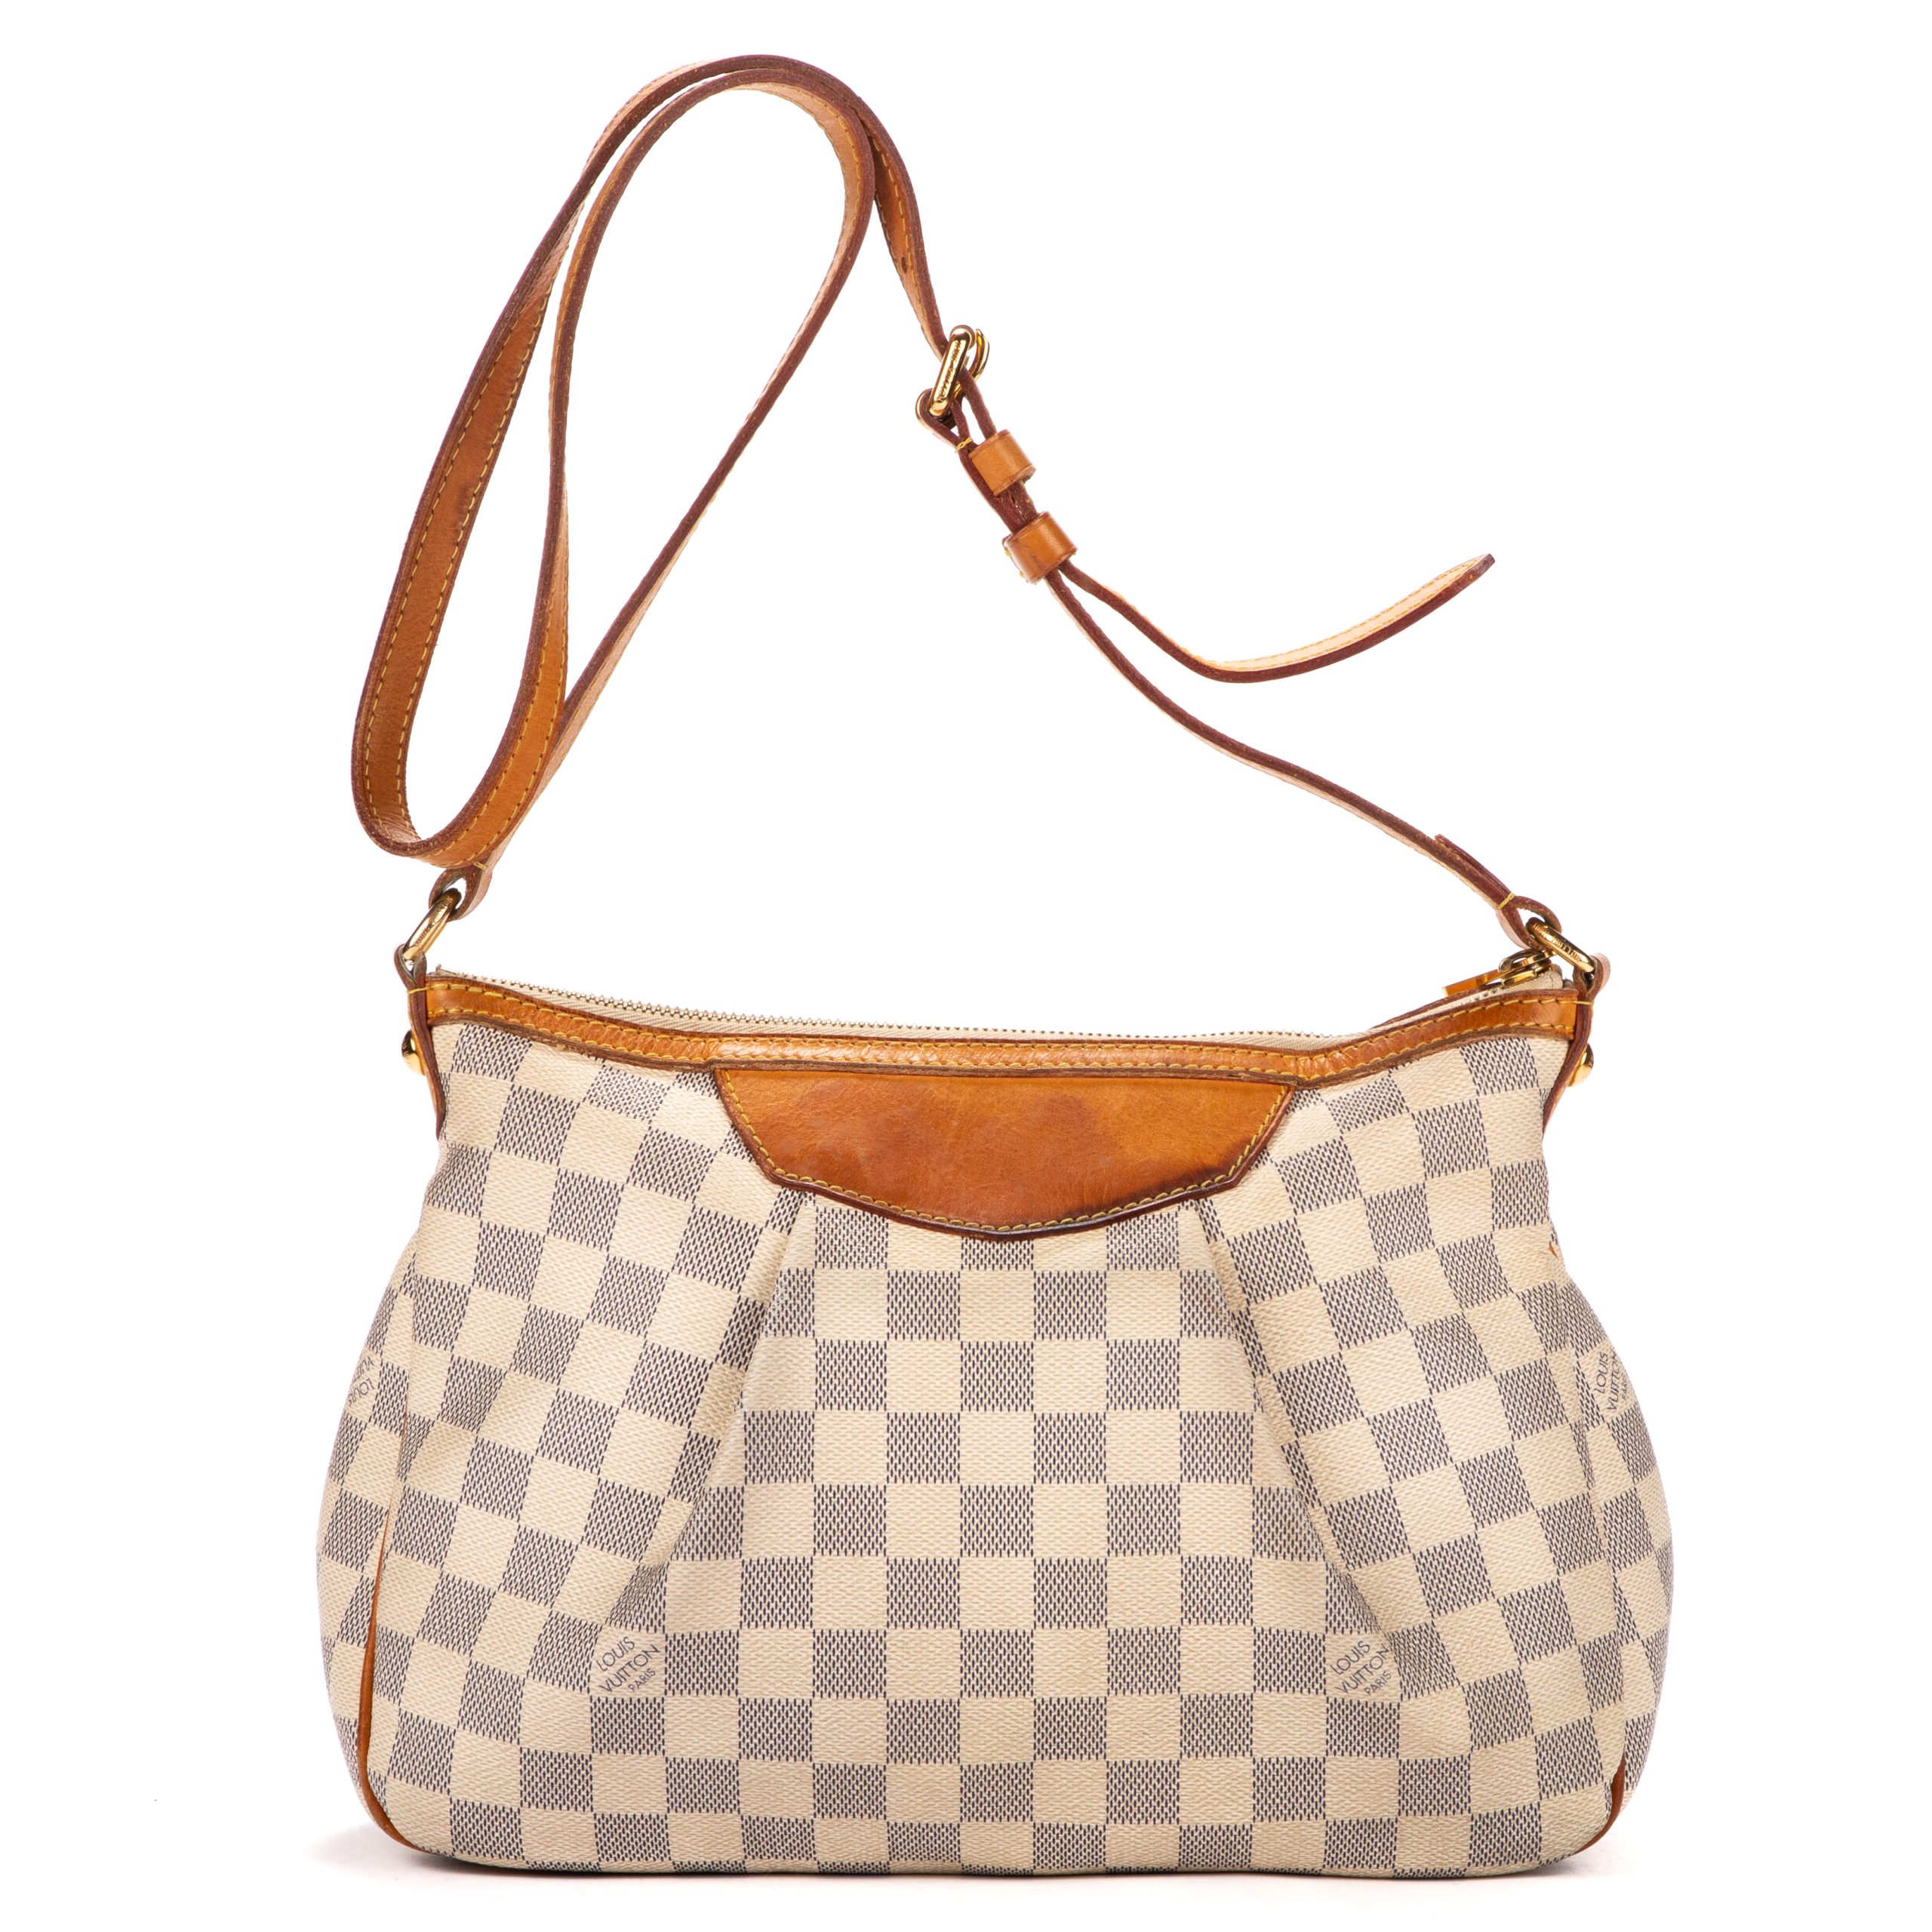 Louis+Vuitton+Siracusa+Shoulder+Bag+PM+White+Leather for sale online